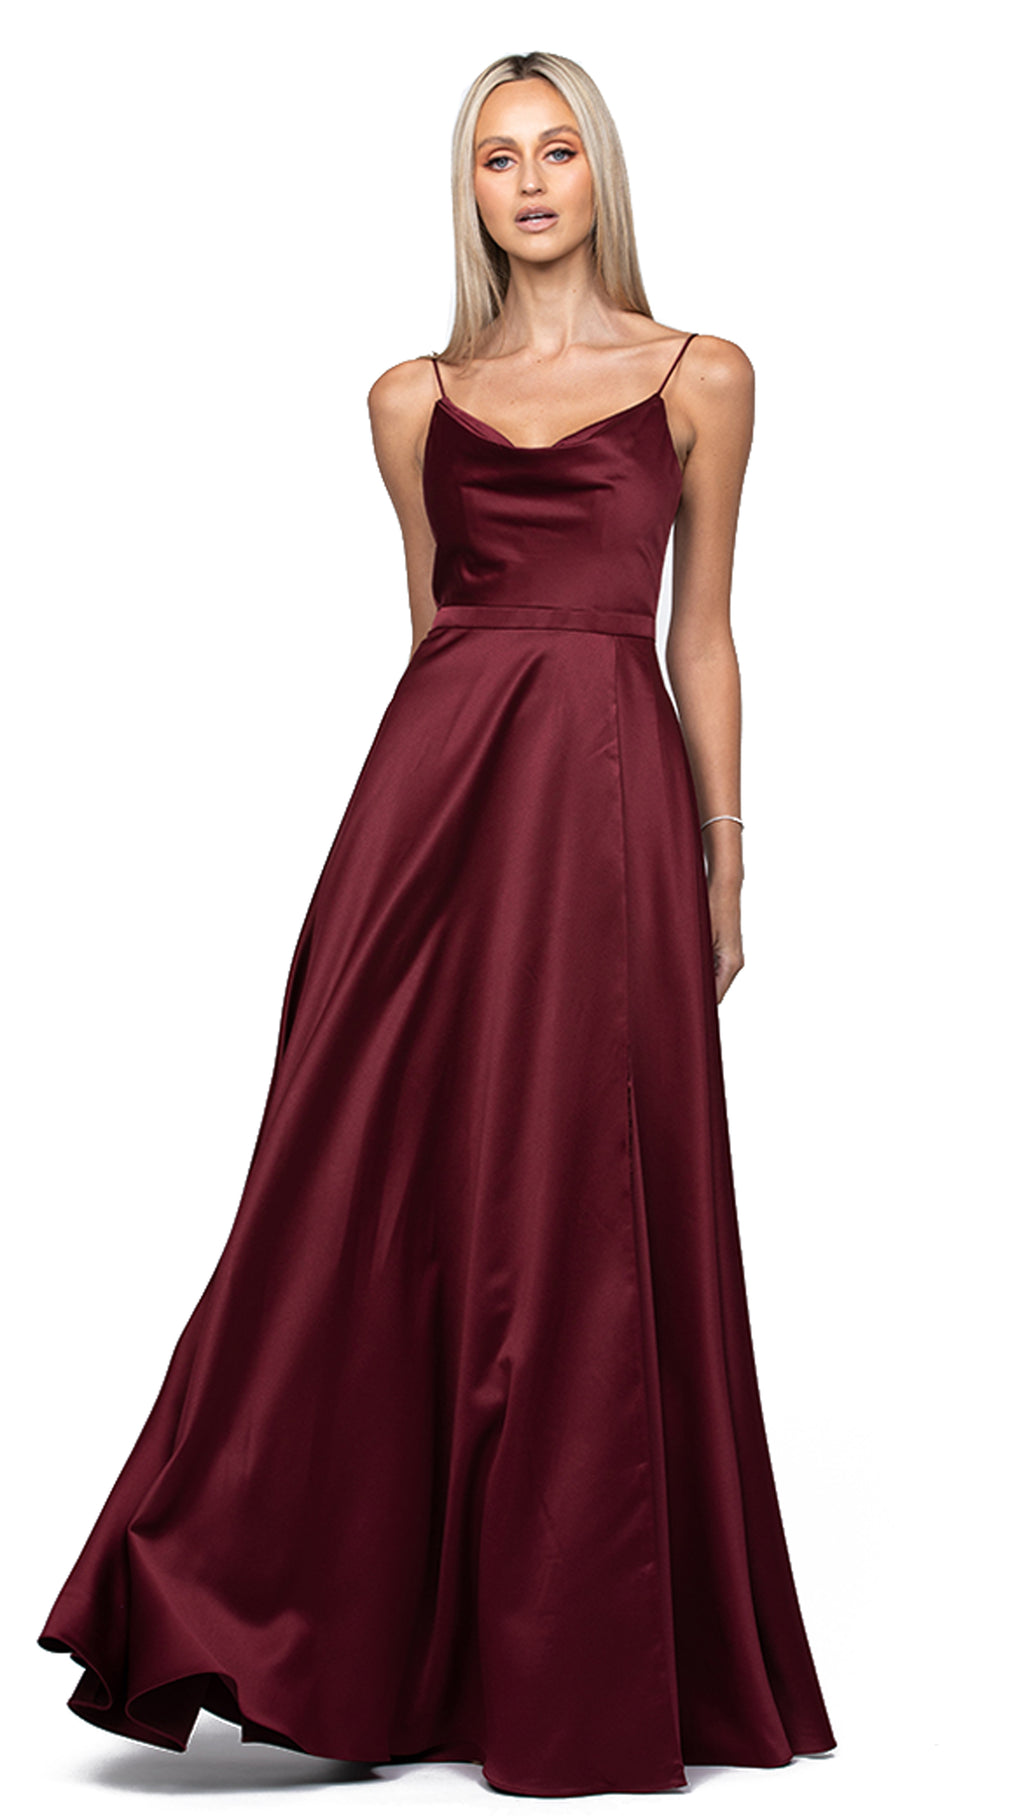 Diamond Cowl Wrap Gown in Dark Red